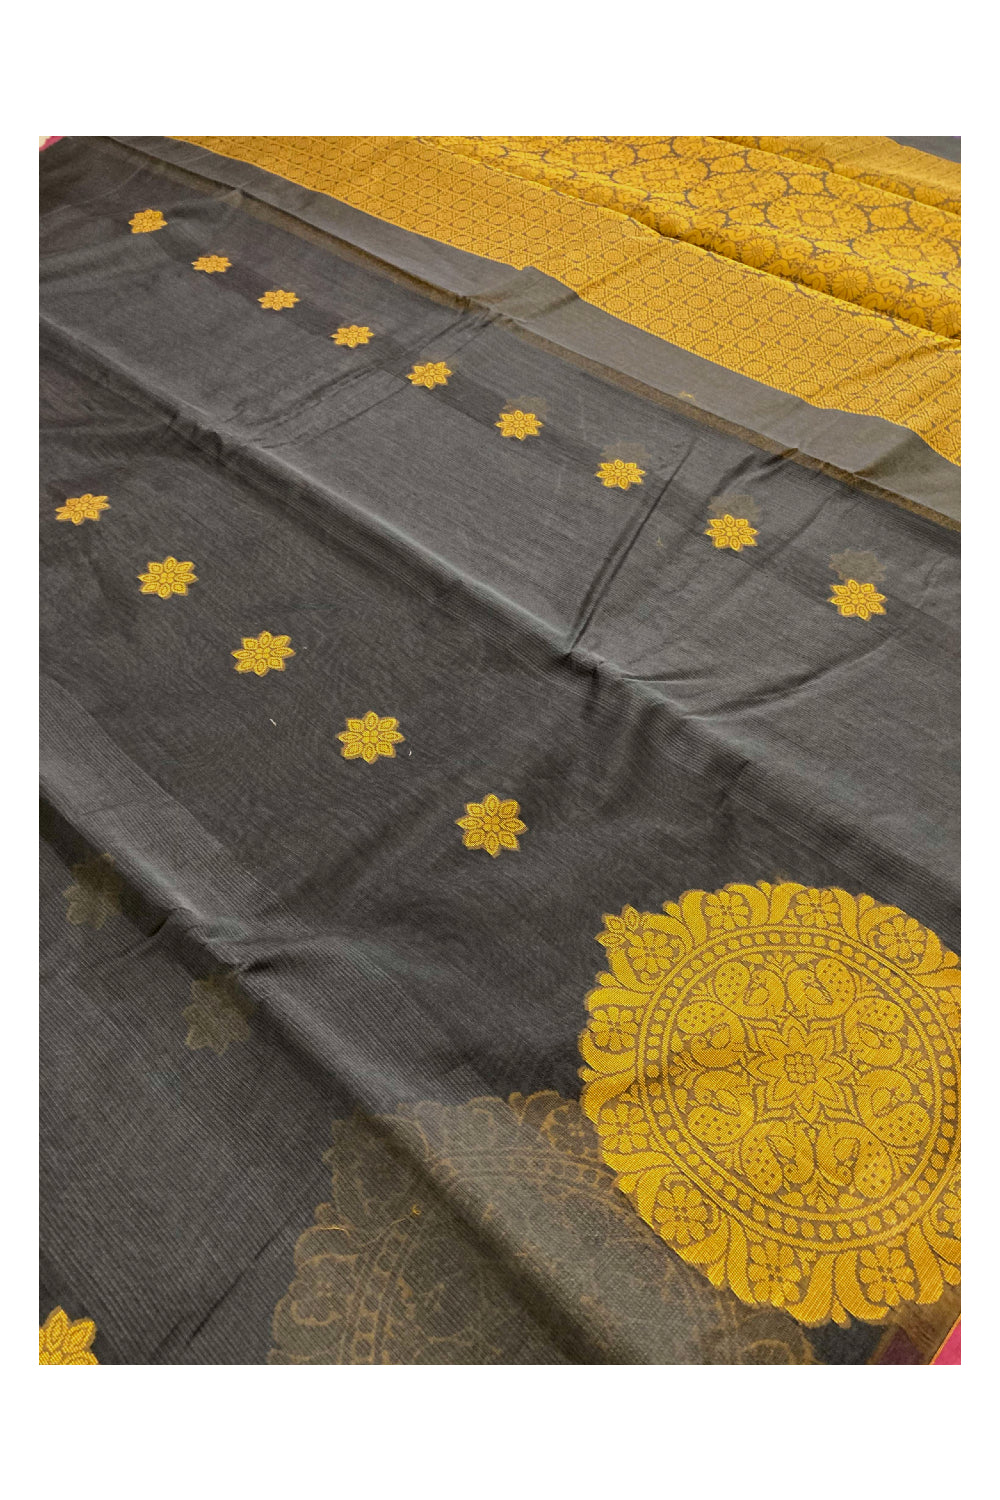 Southloom Sico Gadwal Semi Silk Saree in Dark Grey and Yellow with Floral Motifs (Blouse Piece with Work)